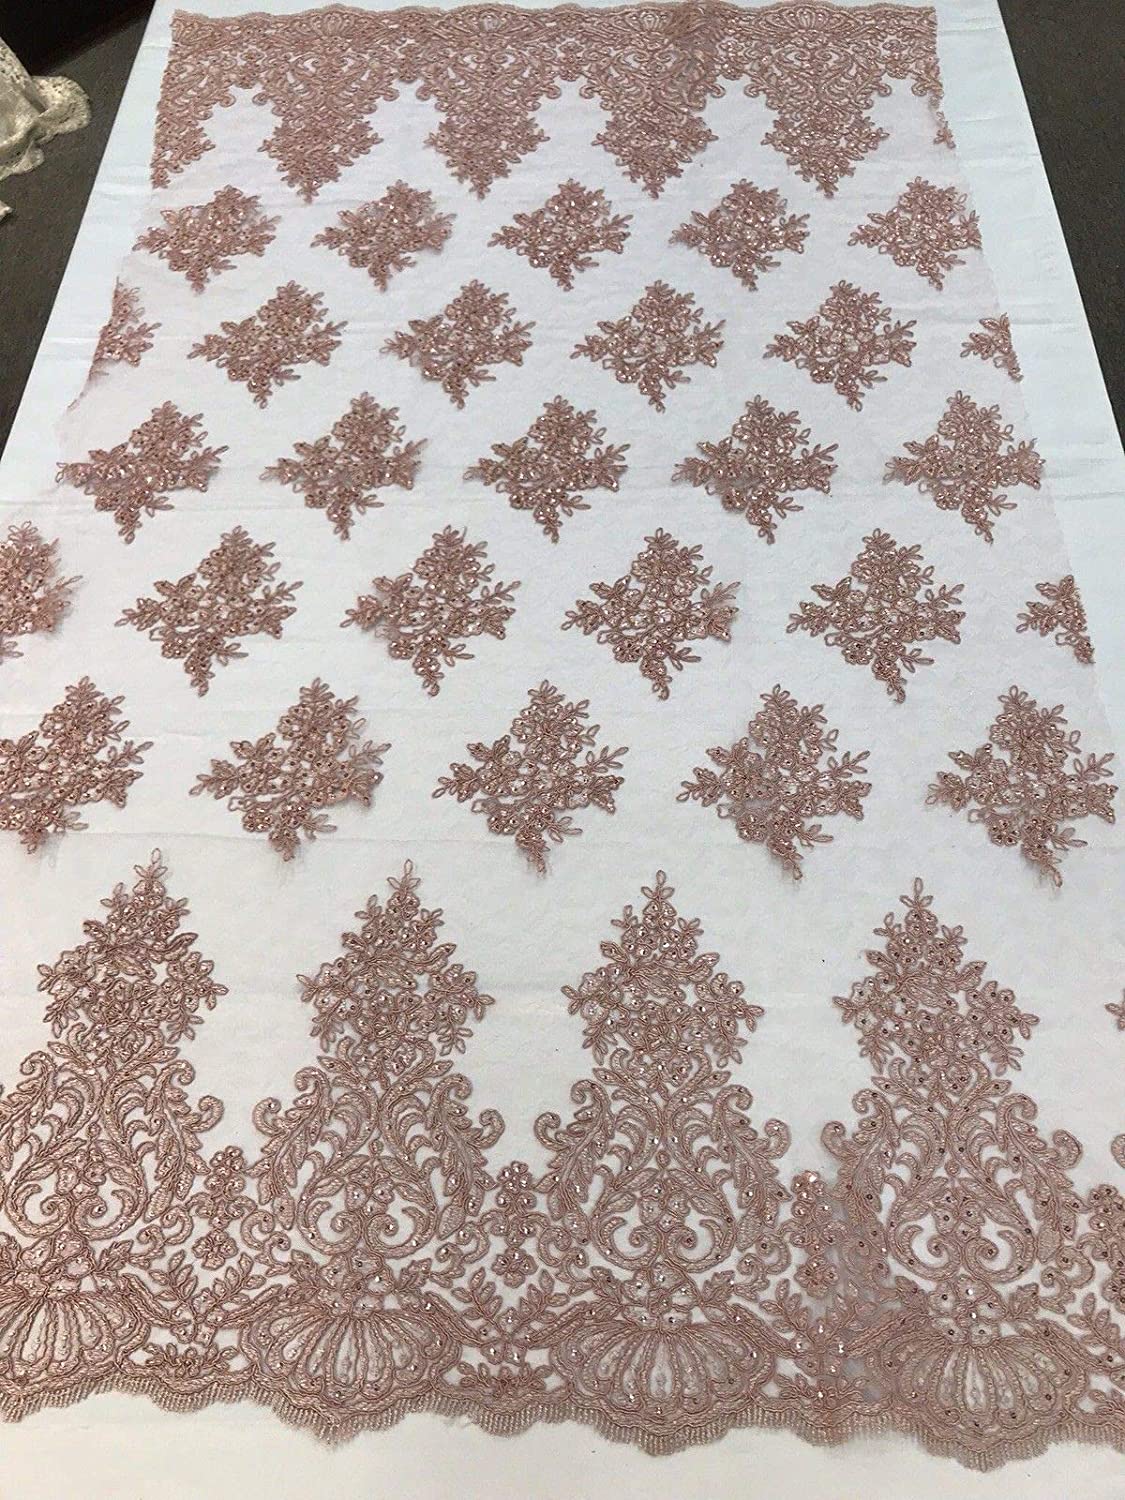 DUSTY ROSE DAMASK LACE EMBROIDERY ON A TEXTURE MESH-BY YARD.